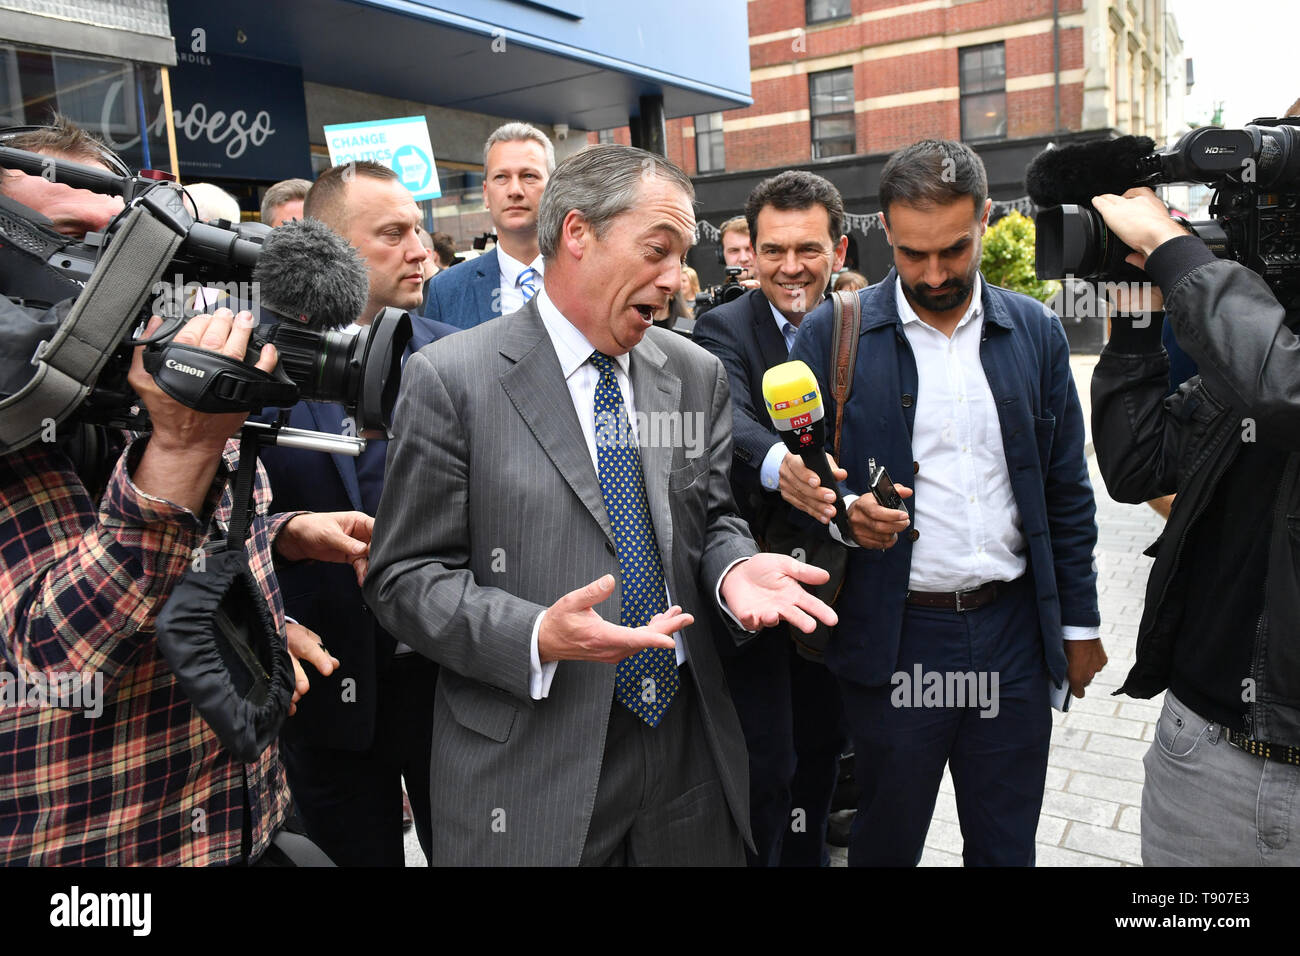 Brexit Party leader Nigel Farage during a walkabout in Merthyr Tydfil, Wales. Stock Photo